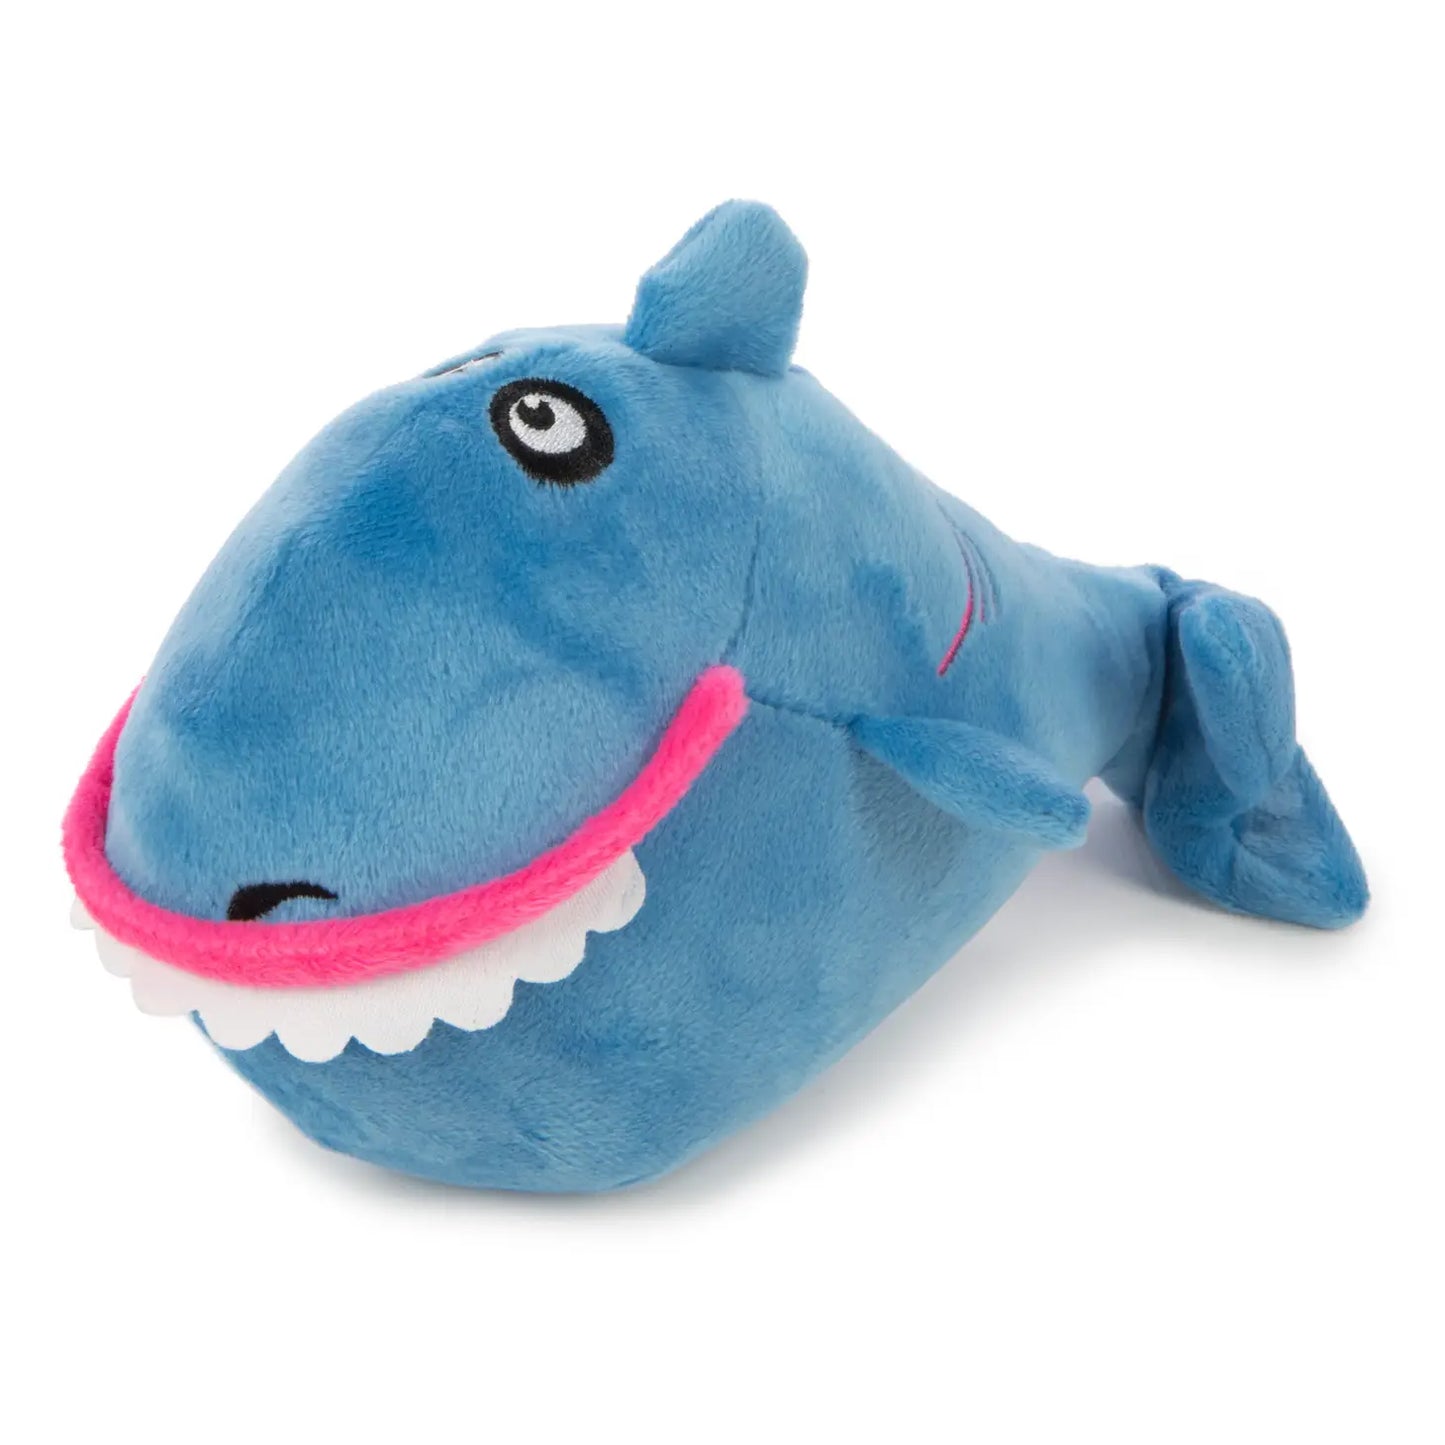 Isolated blue shark toy with a big mouth and teeth